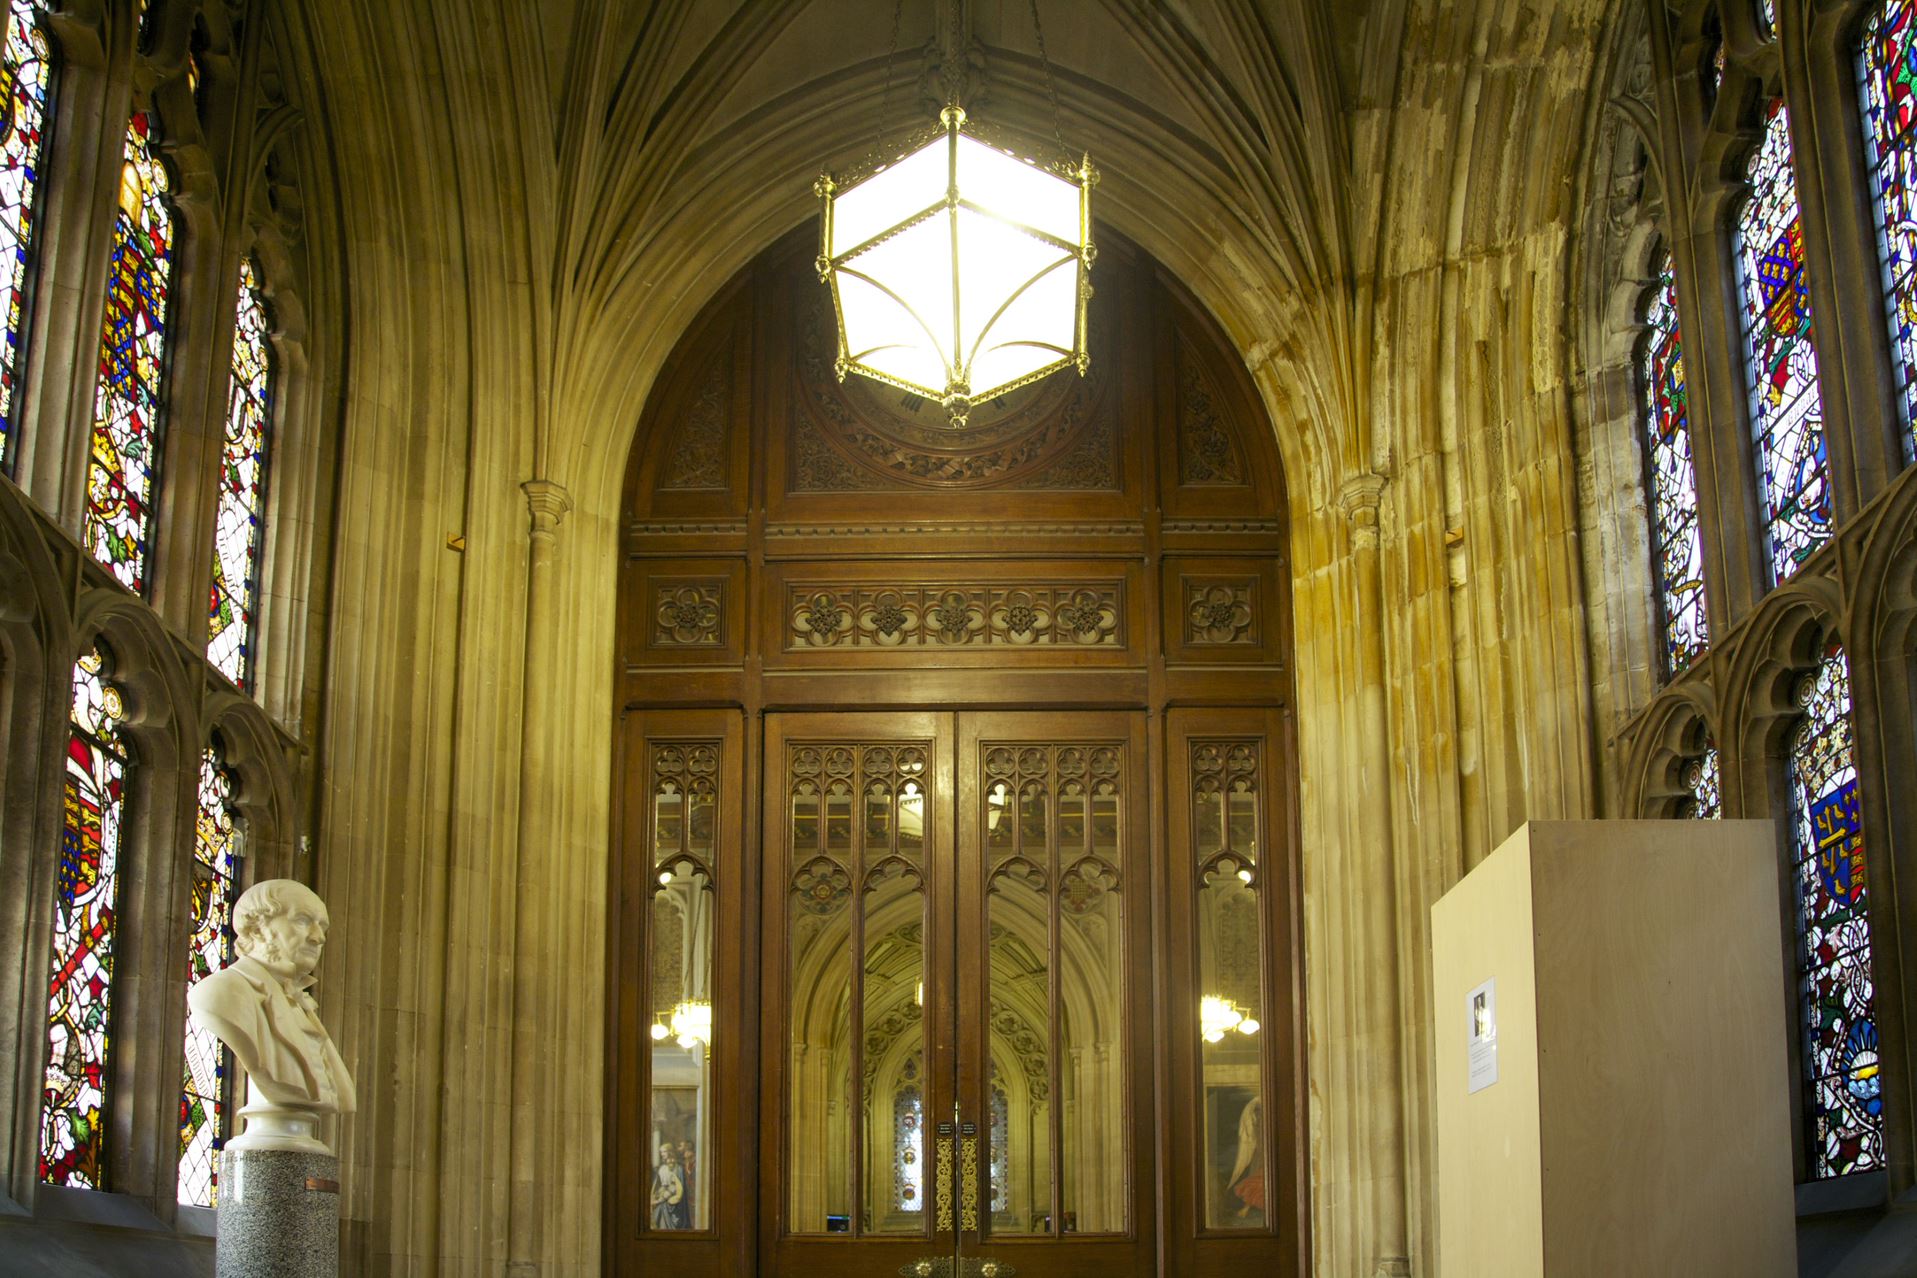 Interior stonework of the Palace of Wesminster.